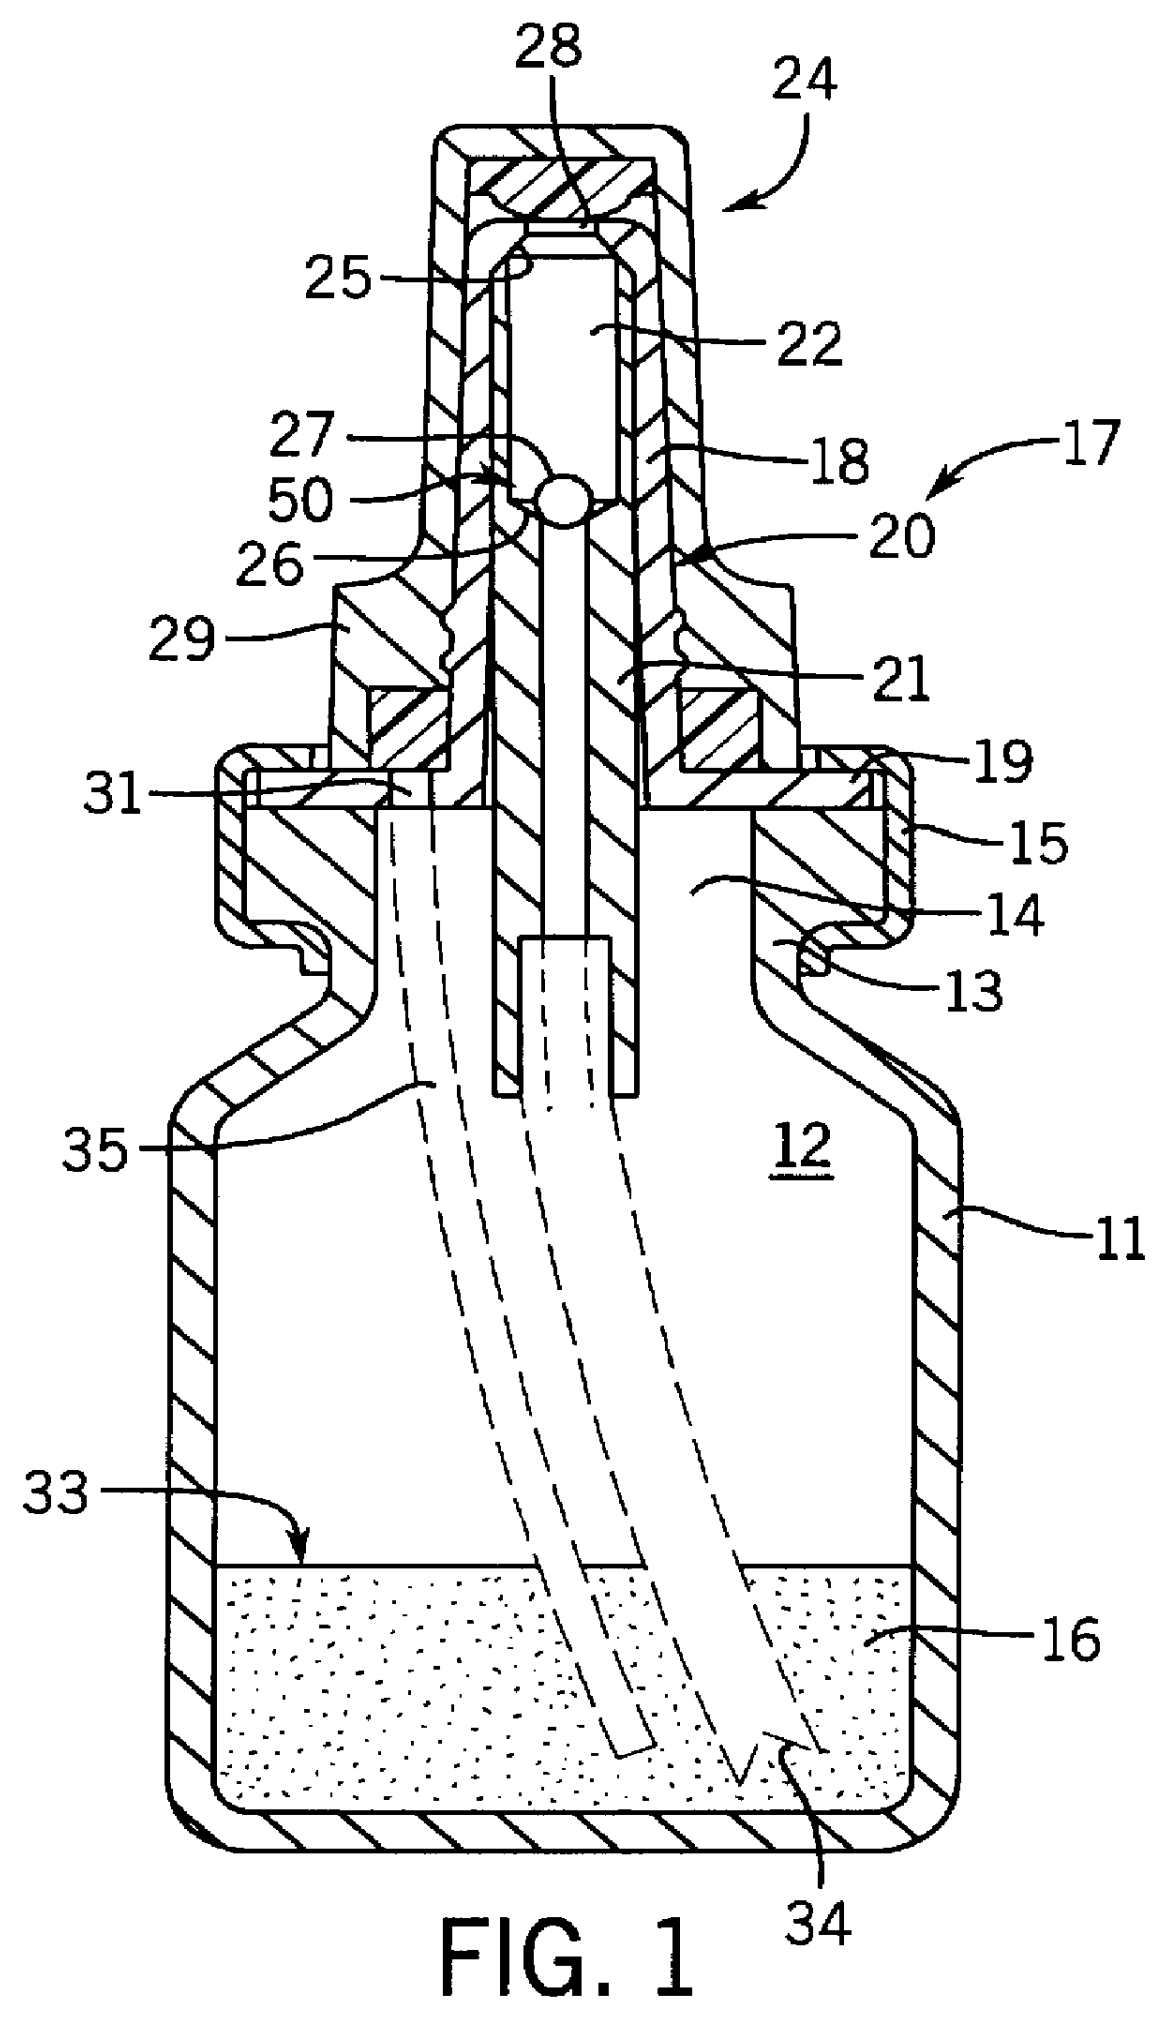 Dosing and discharging device for flowable media including powder/air dispersions